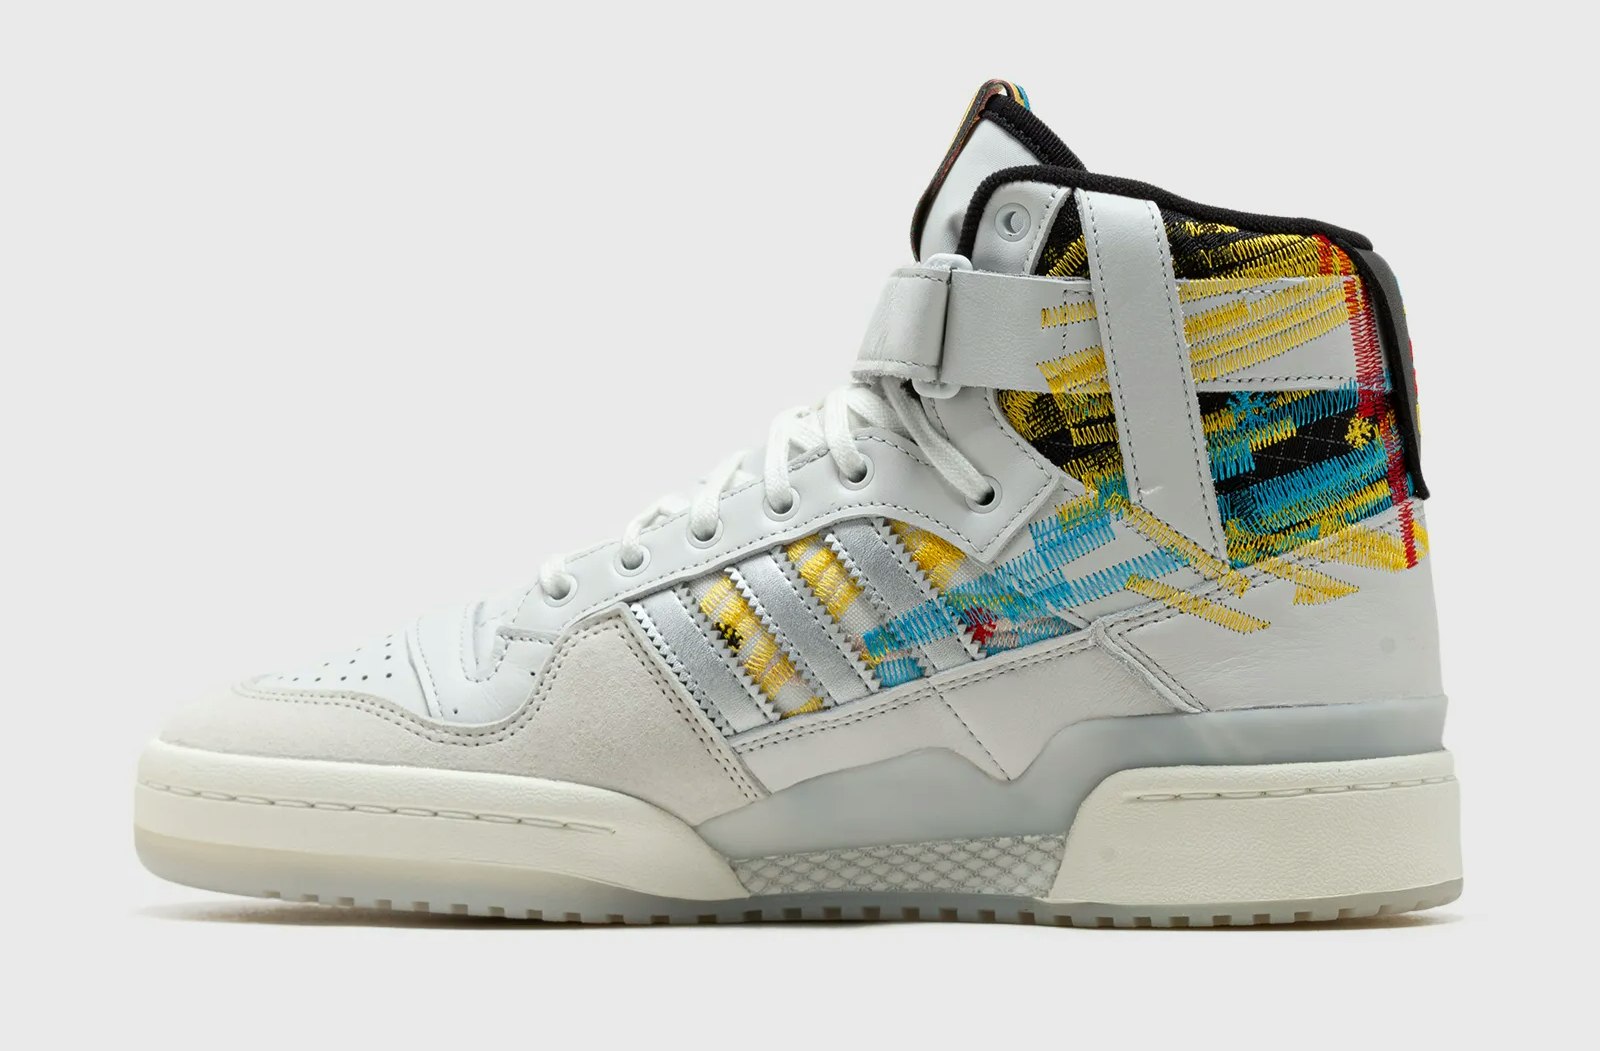 Jacques Chassaing x adidas Forum 84 High "Bold Gold"